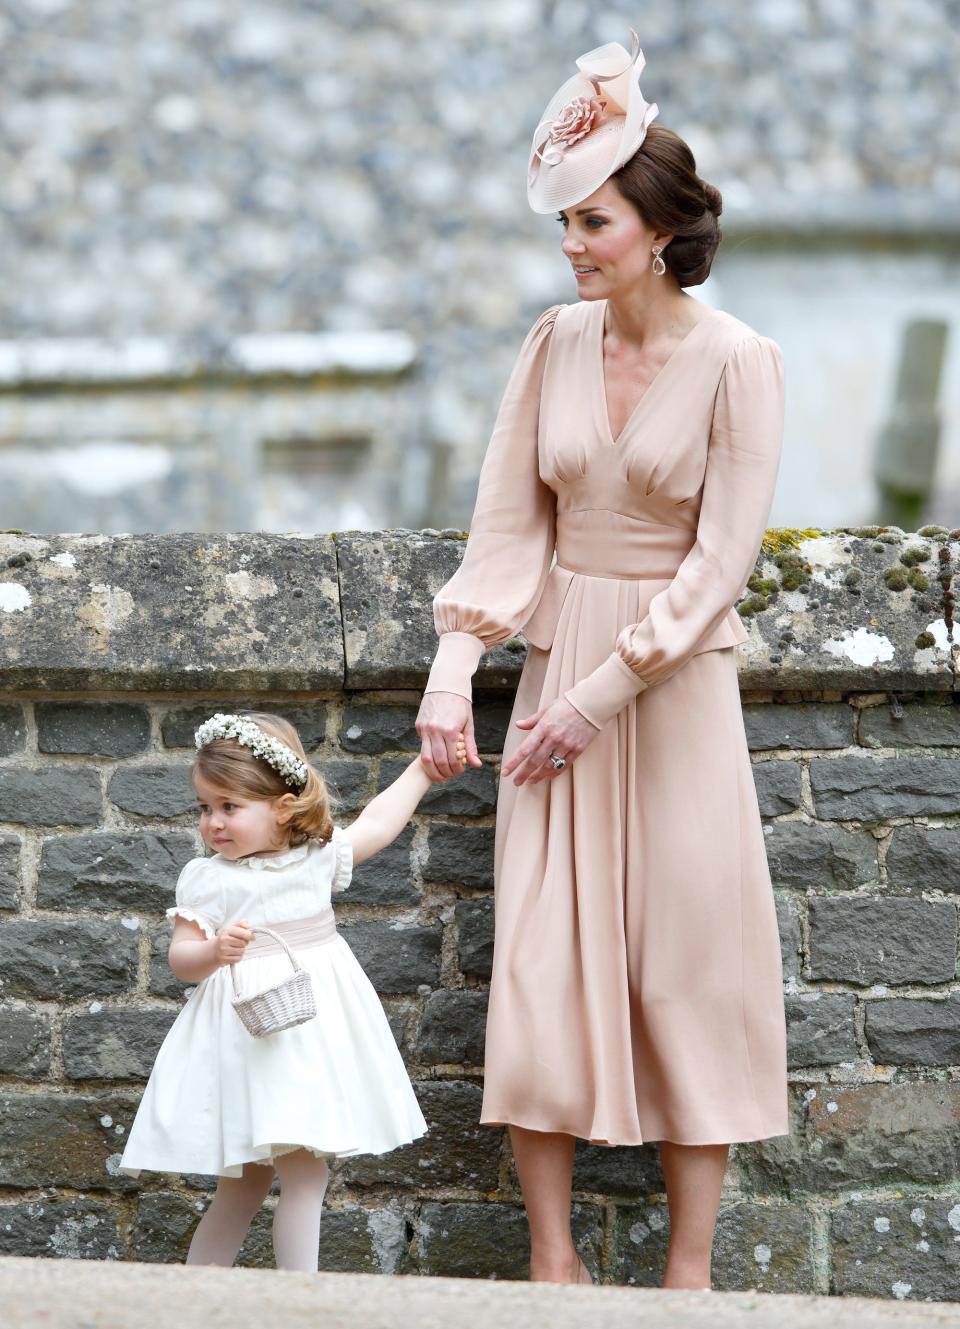 Princess Charlotte and Kate Middleton stand in front of a stone wall.